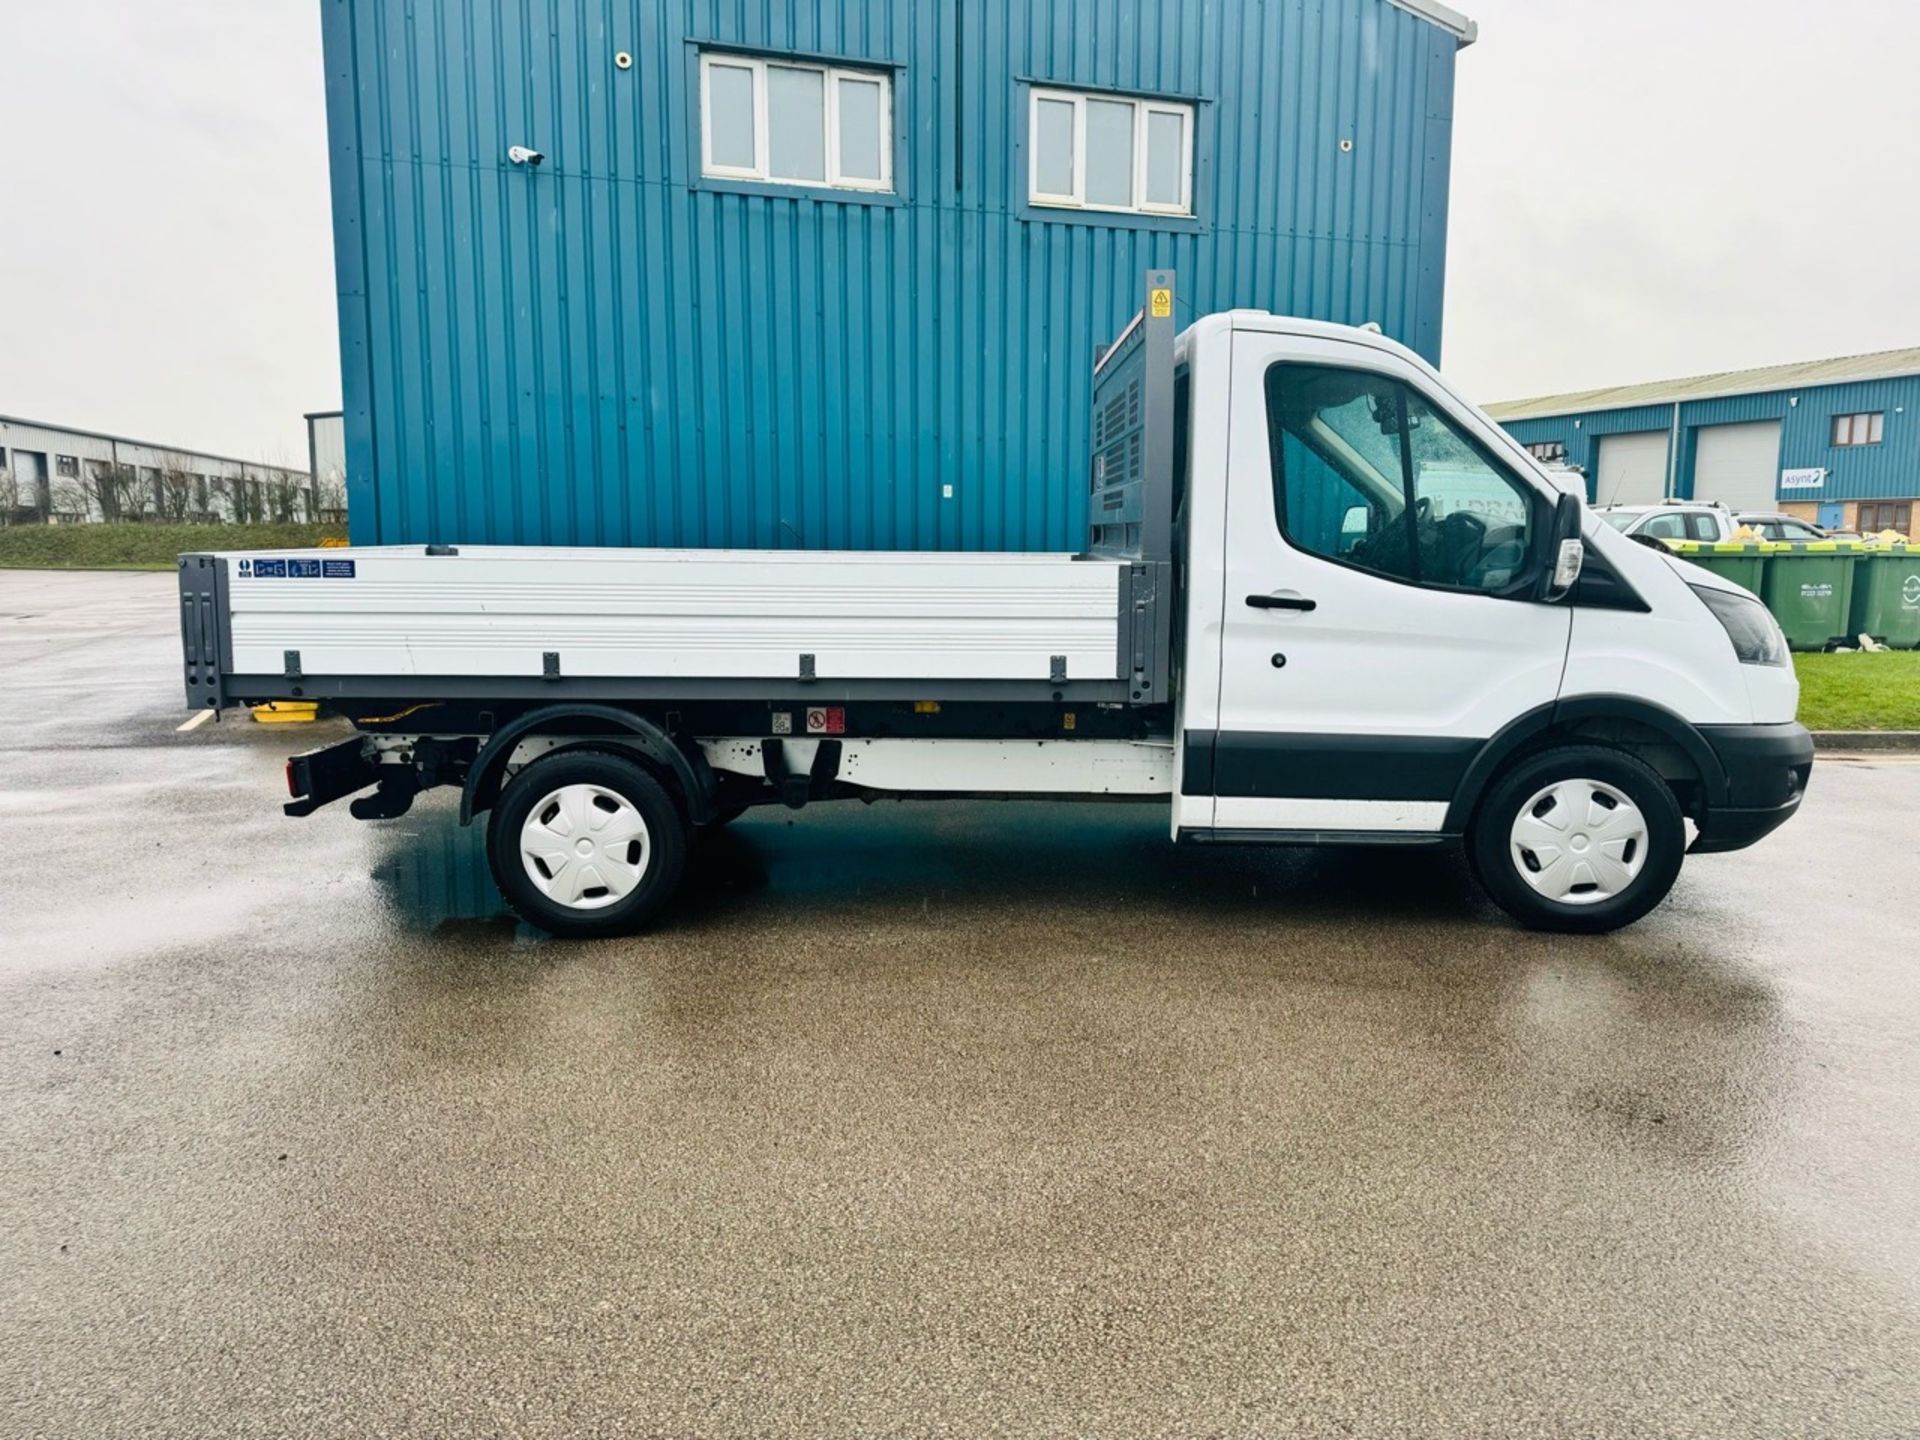 FORD TRANSIT 2.0 TIPPER130ps 'One Stop' Tipper - Manual - Diesel - 2.0 - Tipper Body 94.6k miles - Image 4 of 7